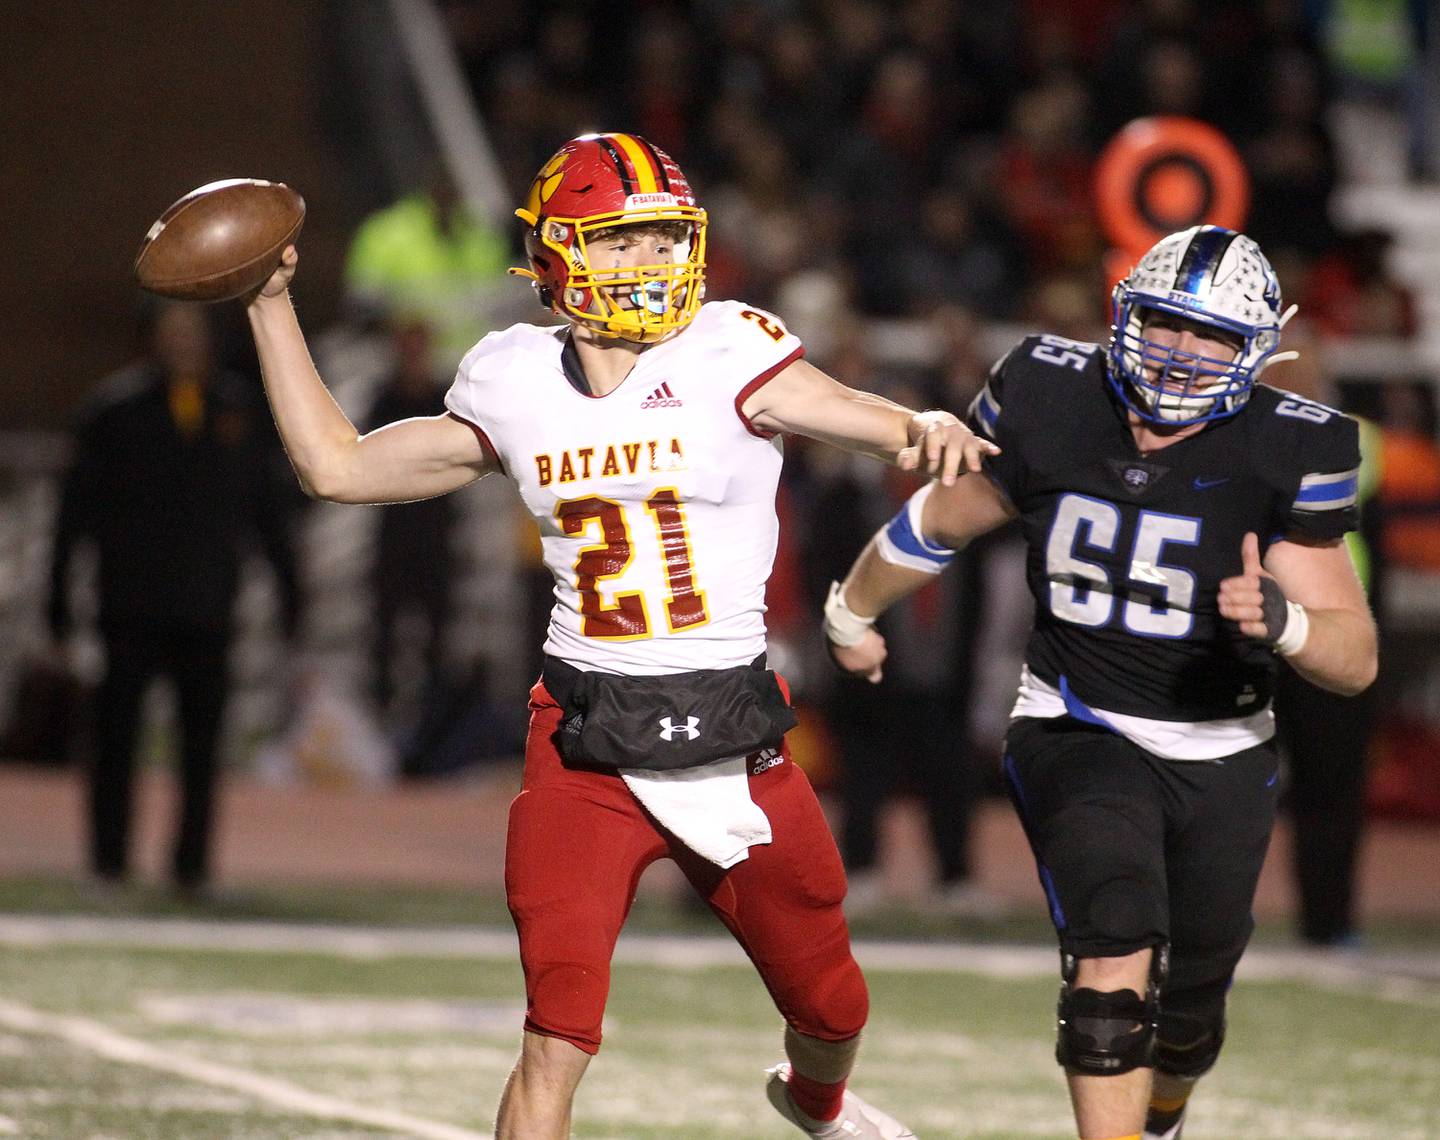 Batavia quarterback Ryan Boy throws the ball during a game at St. Charles North on Friday, Oct. 22, 2021.